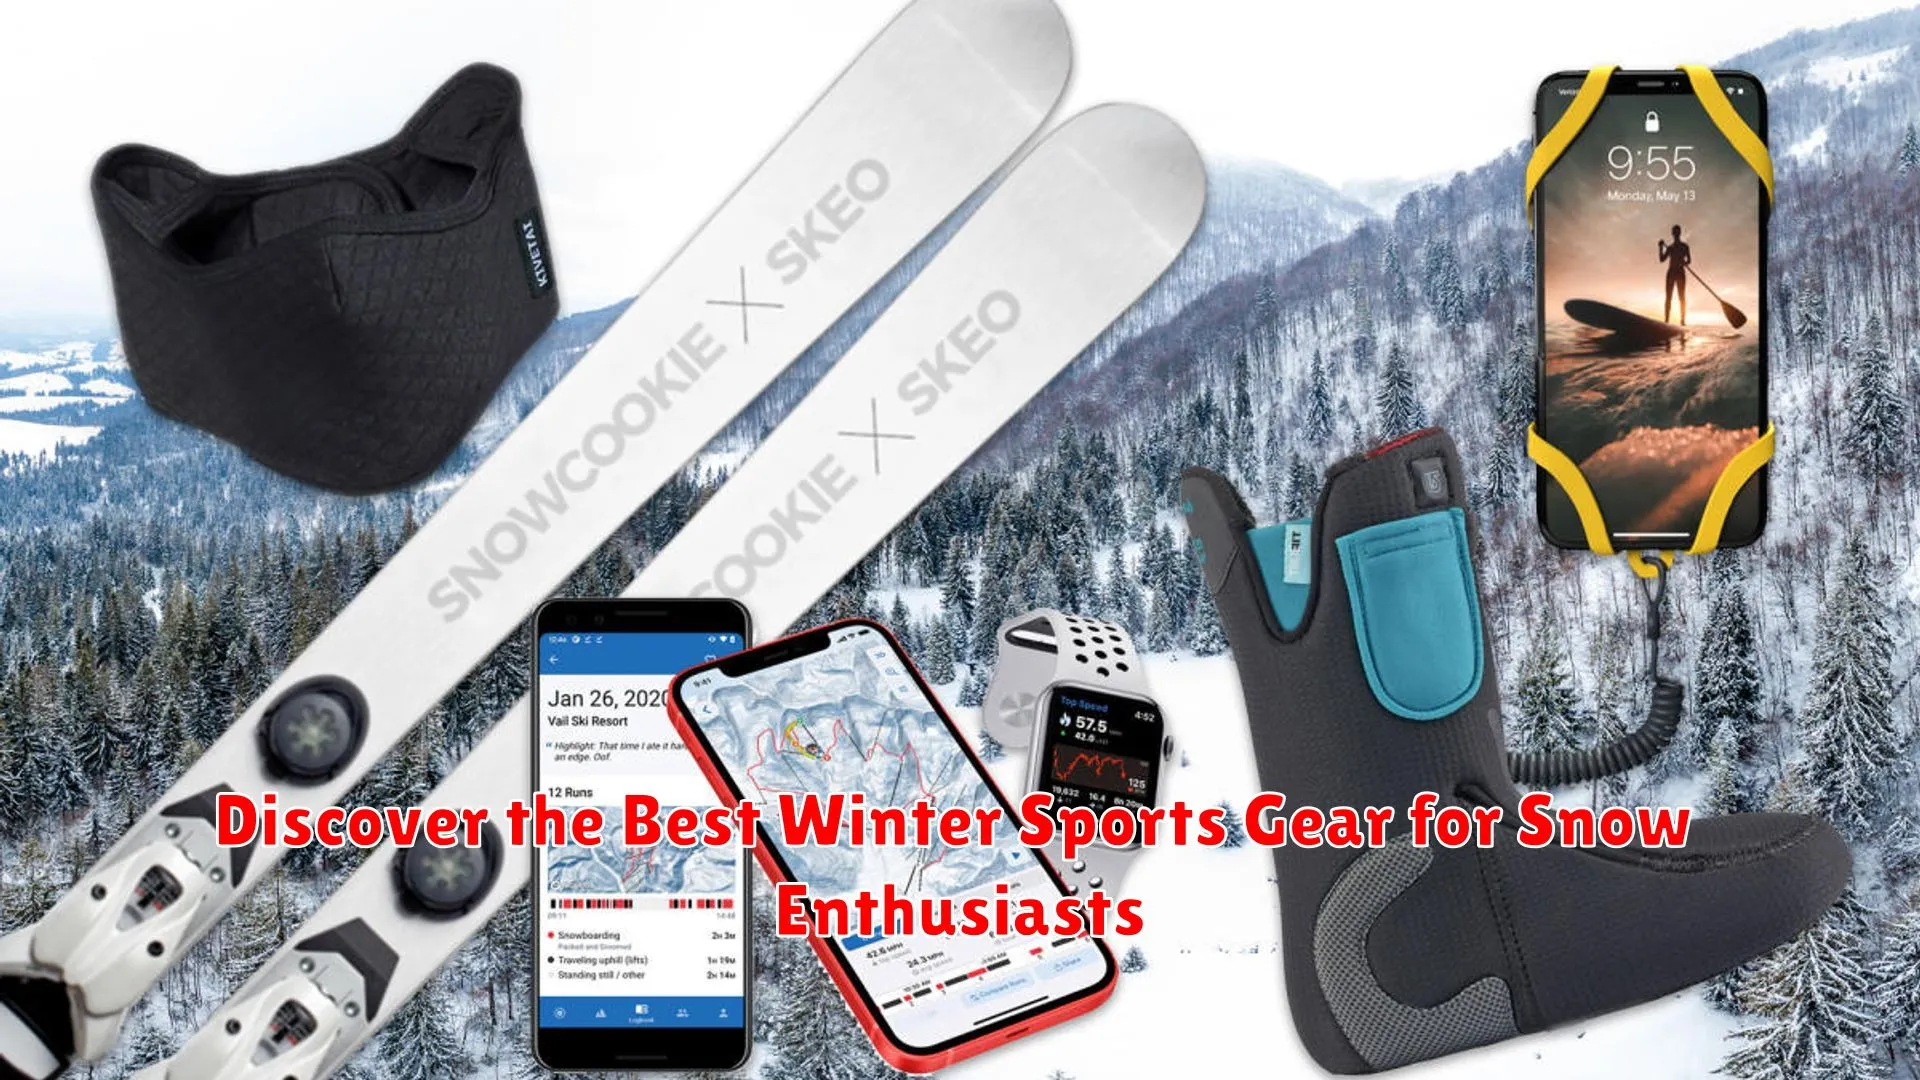 Discover the Best Winter Sports Gear for Snow Enthusiasts